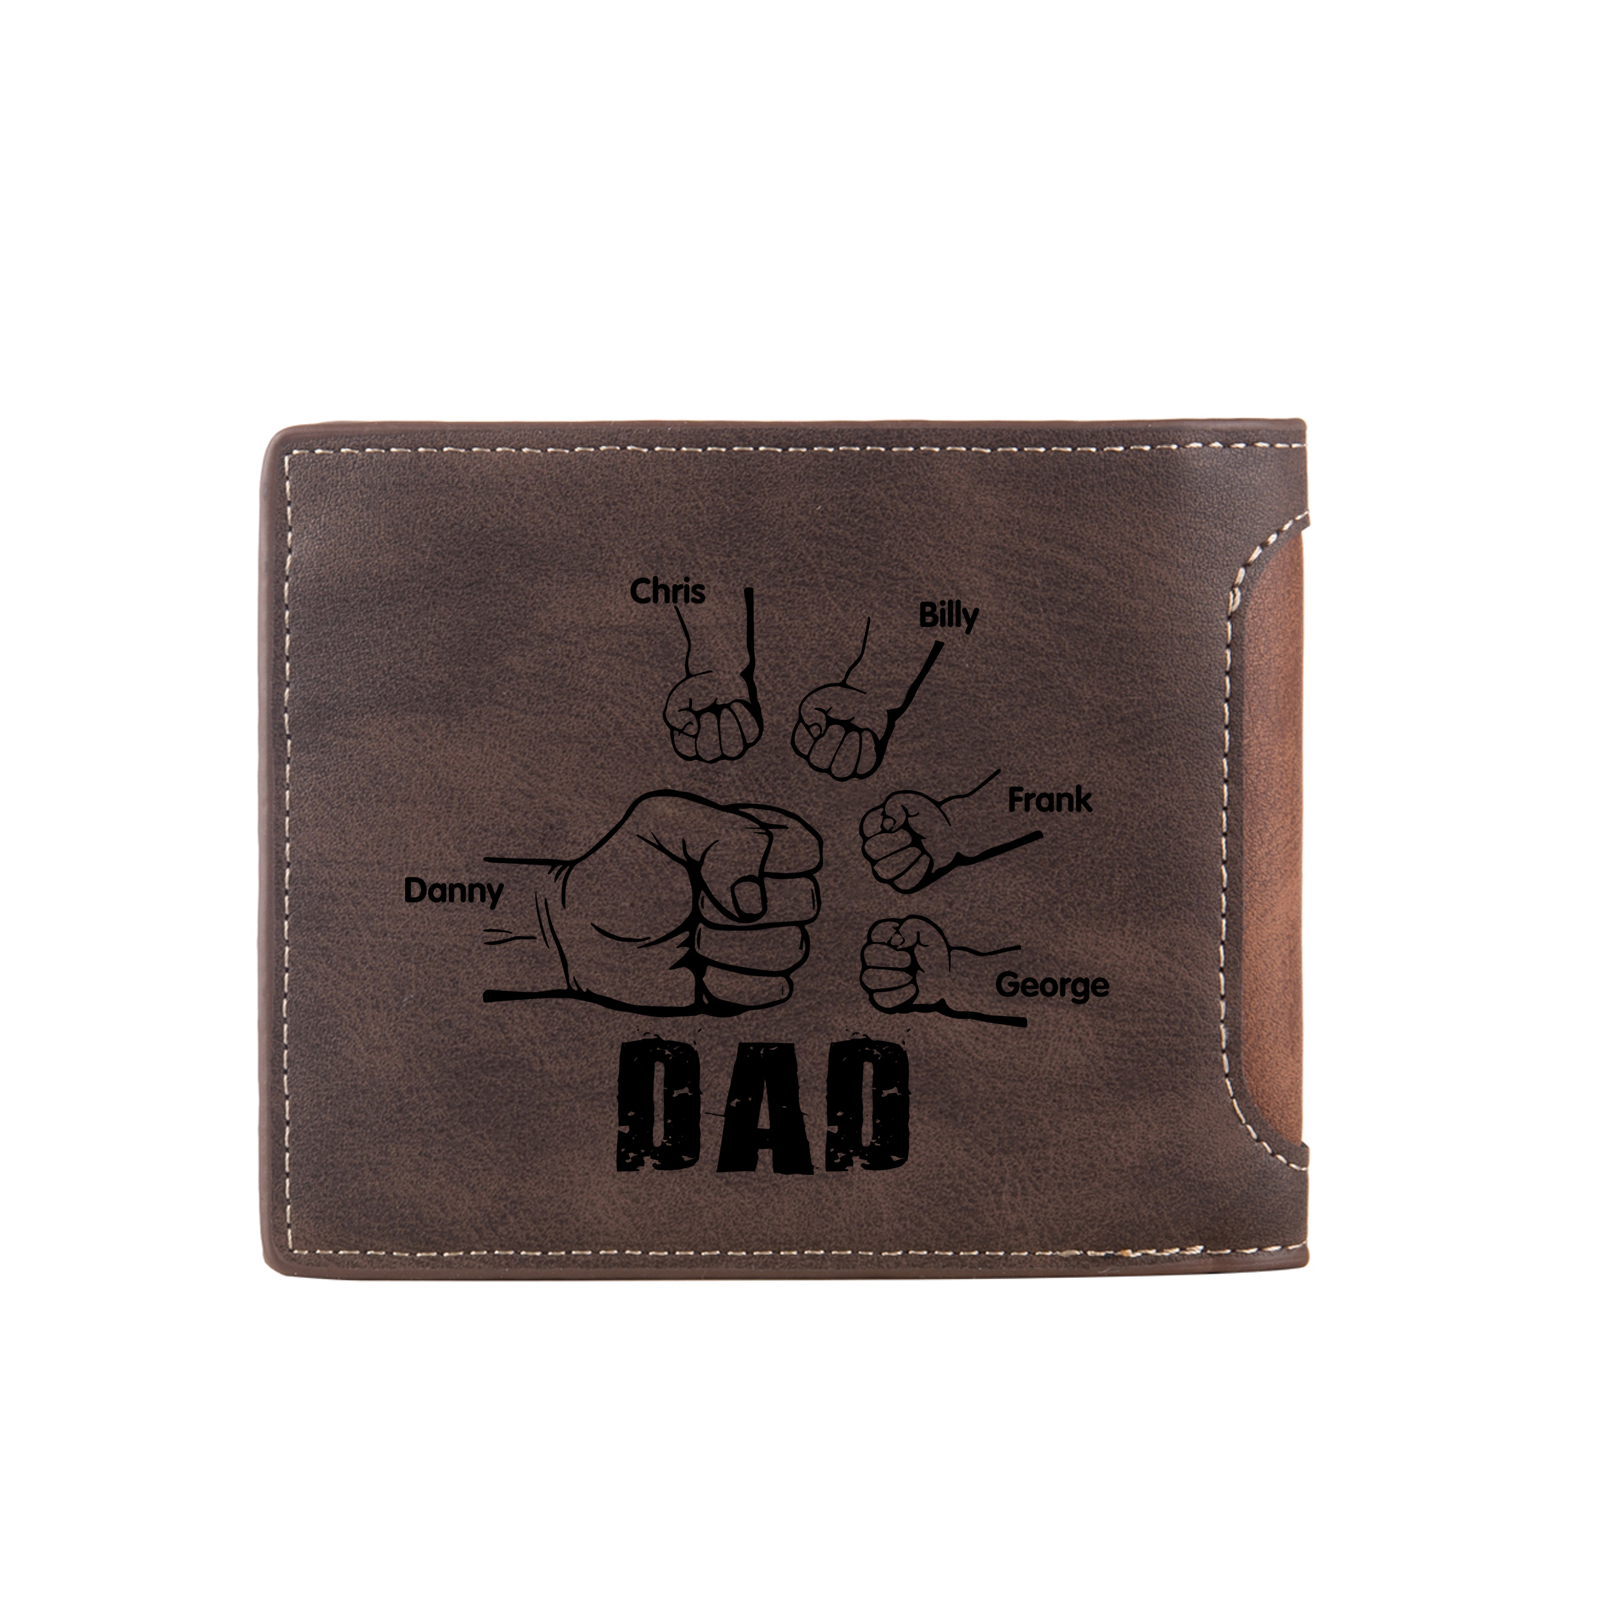 5 Names - Personalized Photo Custom Leather Men's Folding Wallet as a Father's Day Gift for Dad